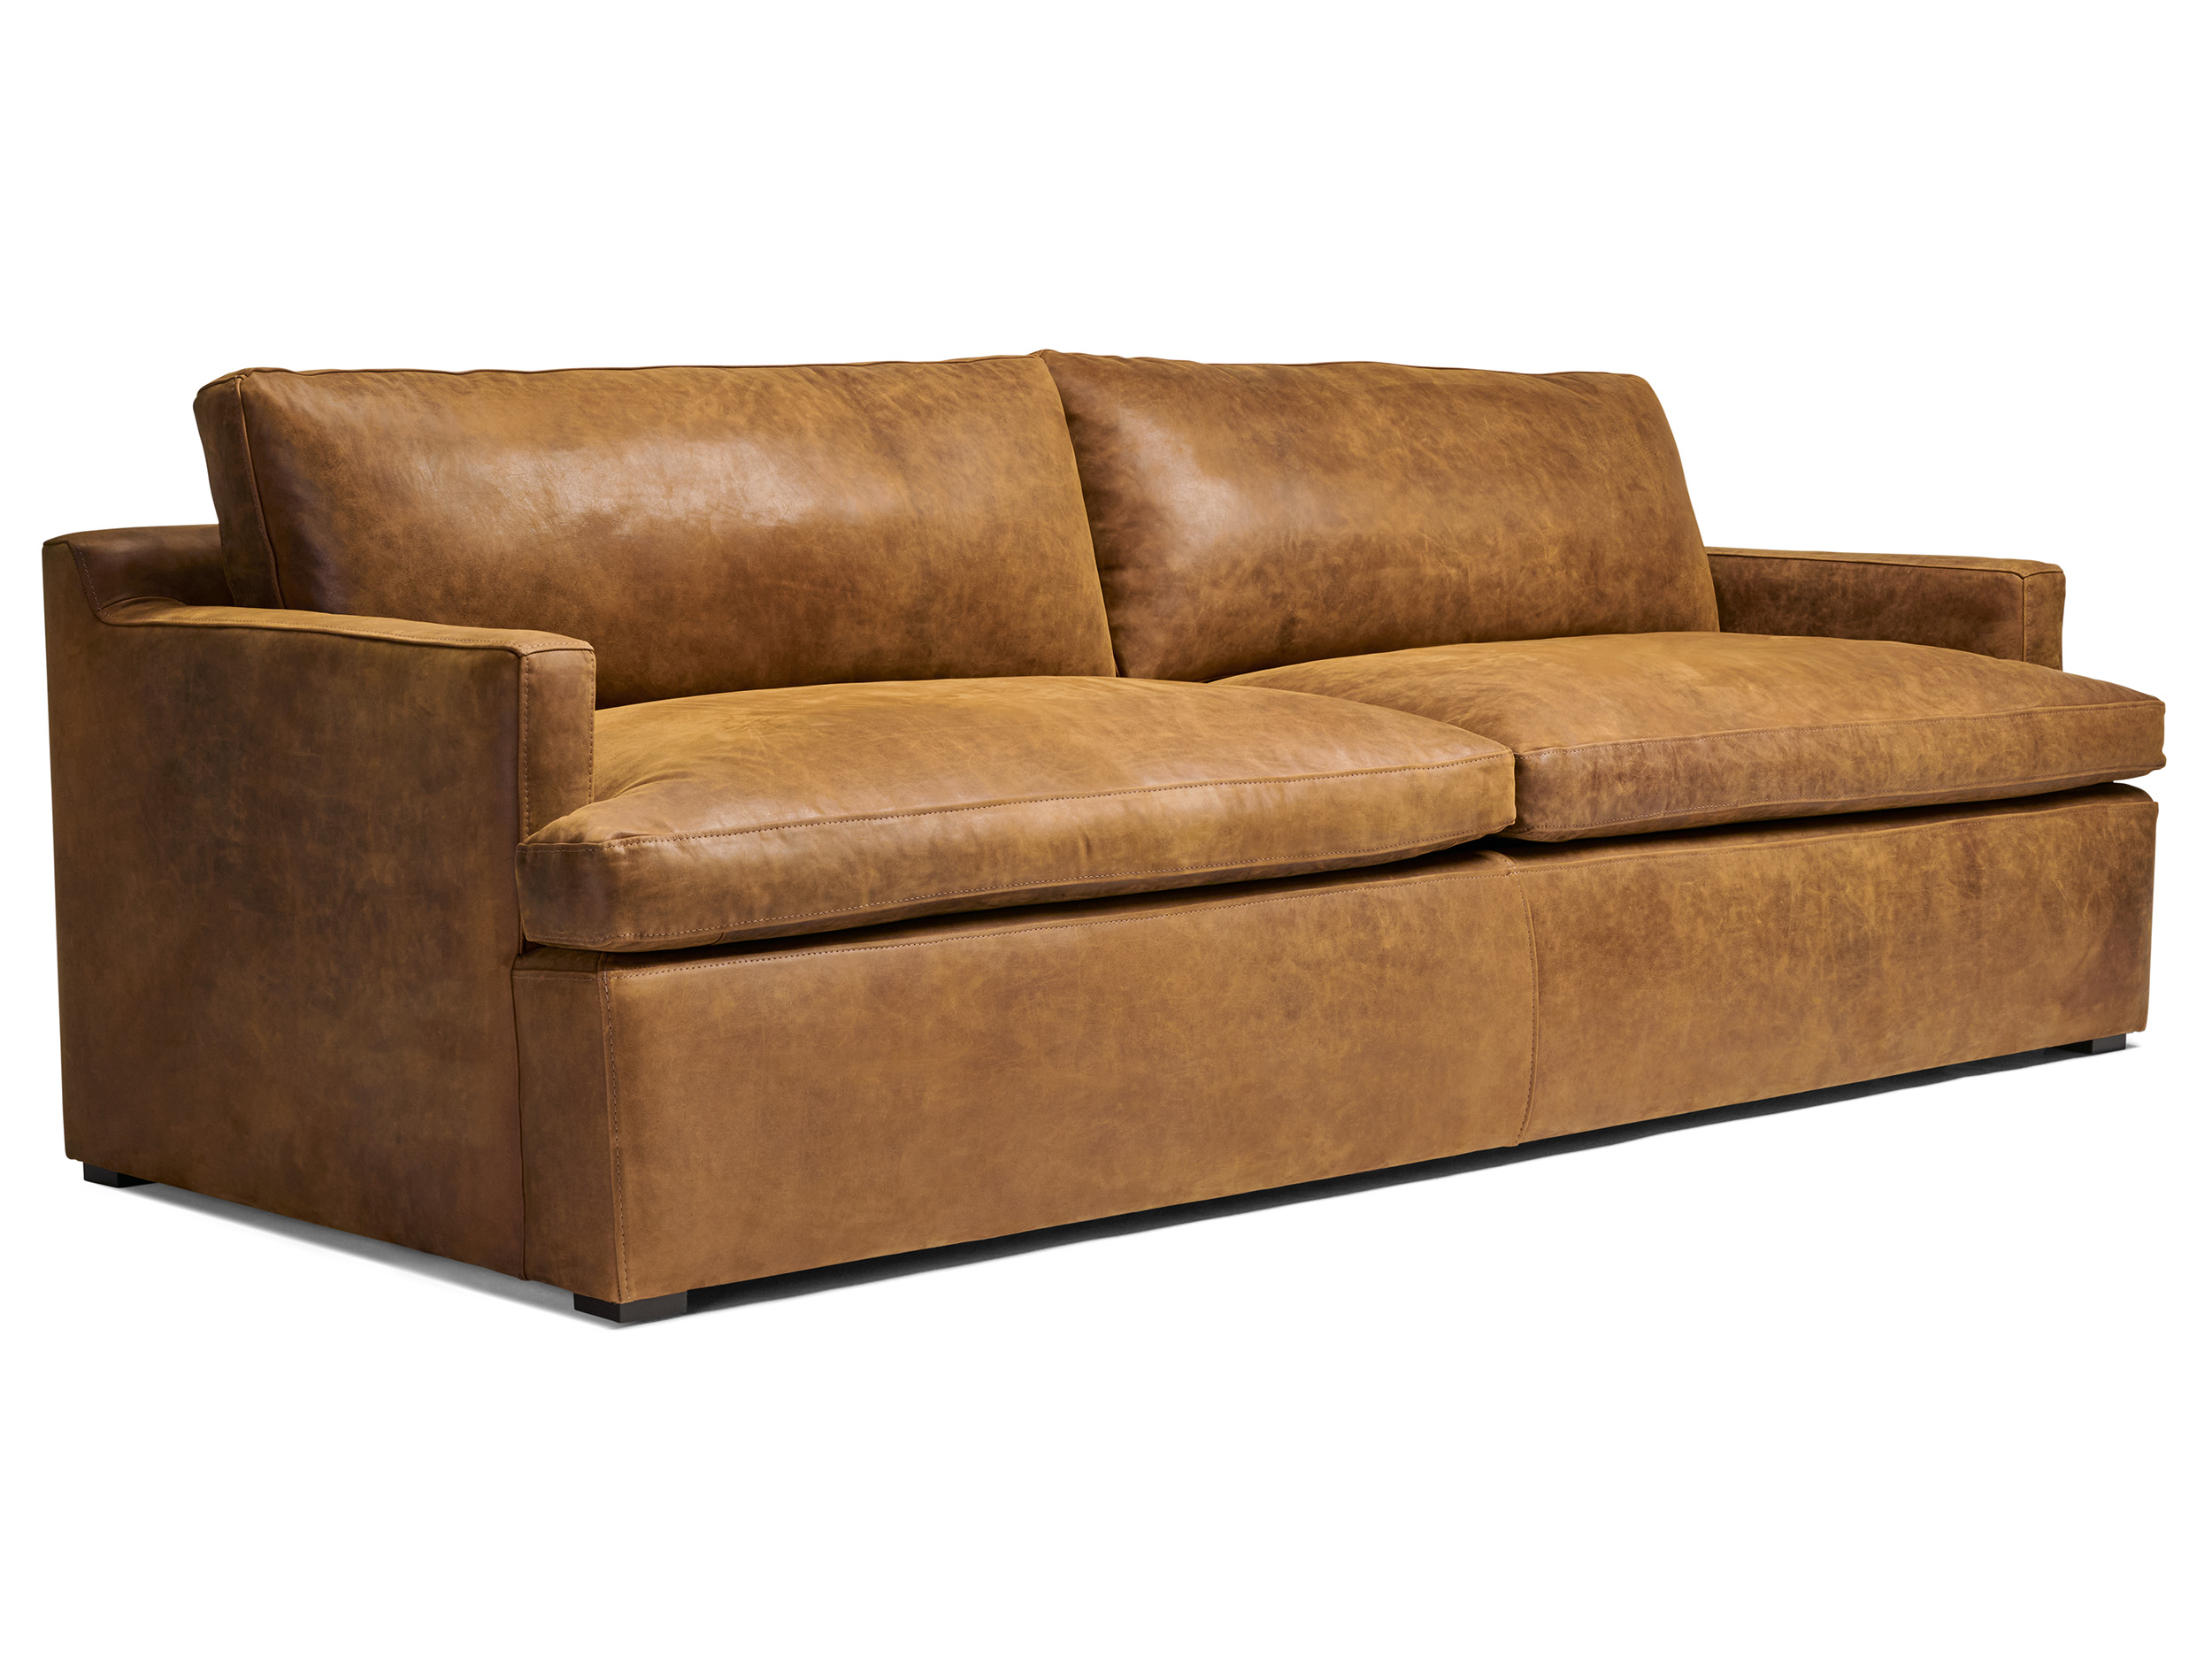 In Stock 96 x 40 Muir Track Arm Leather Sofa in Full Aniline Burnham Sycamore Nubuck Leather - front angle